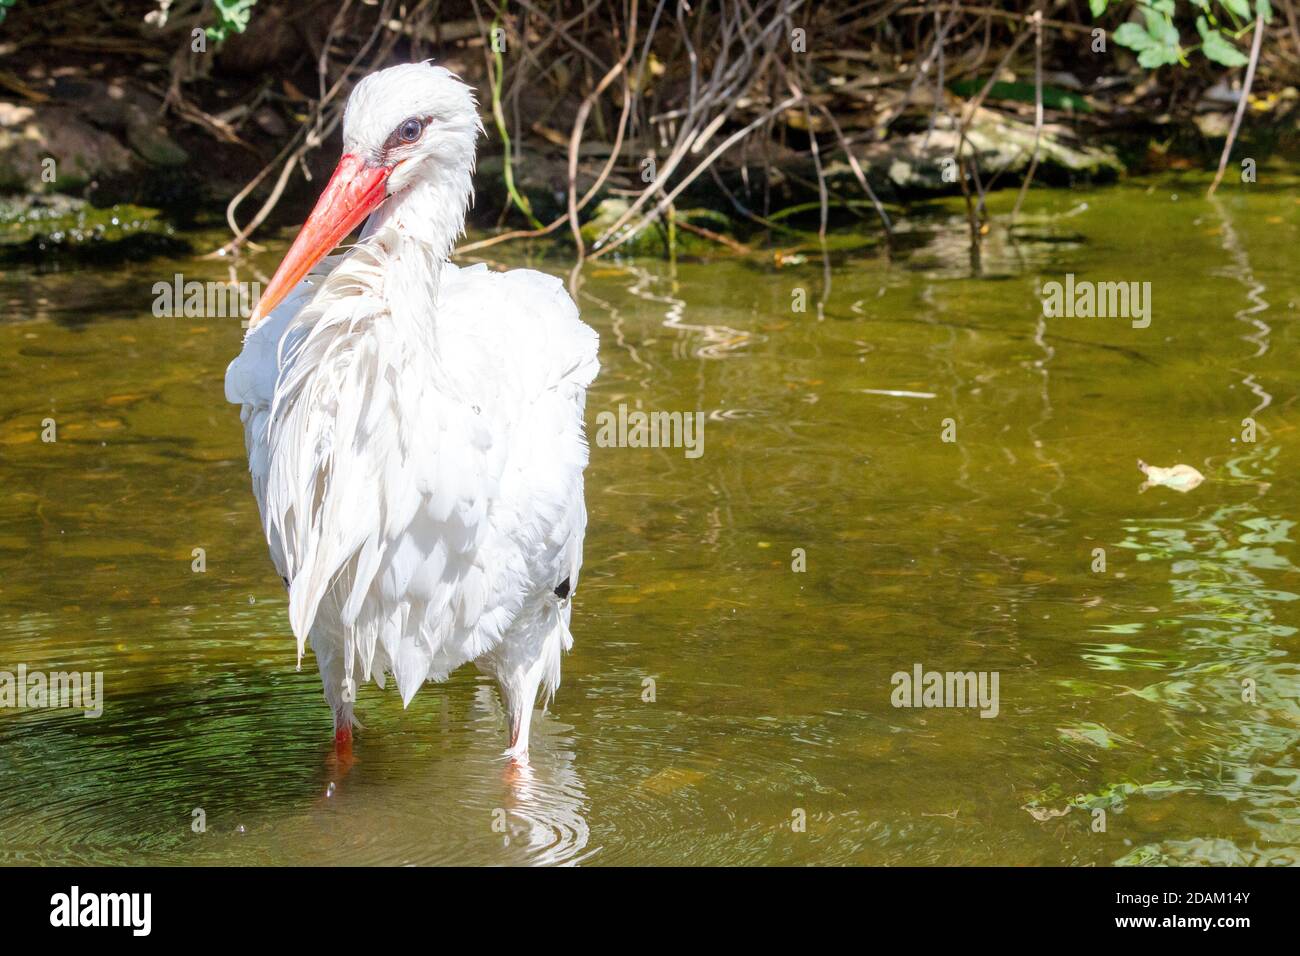 View of a stork standing in the water of a pond Stock Photo